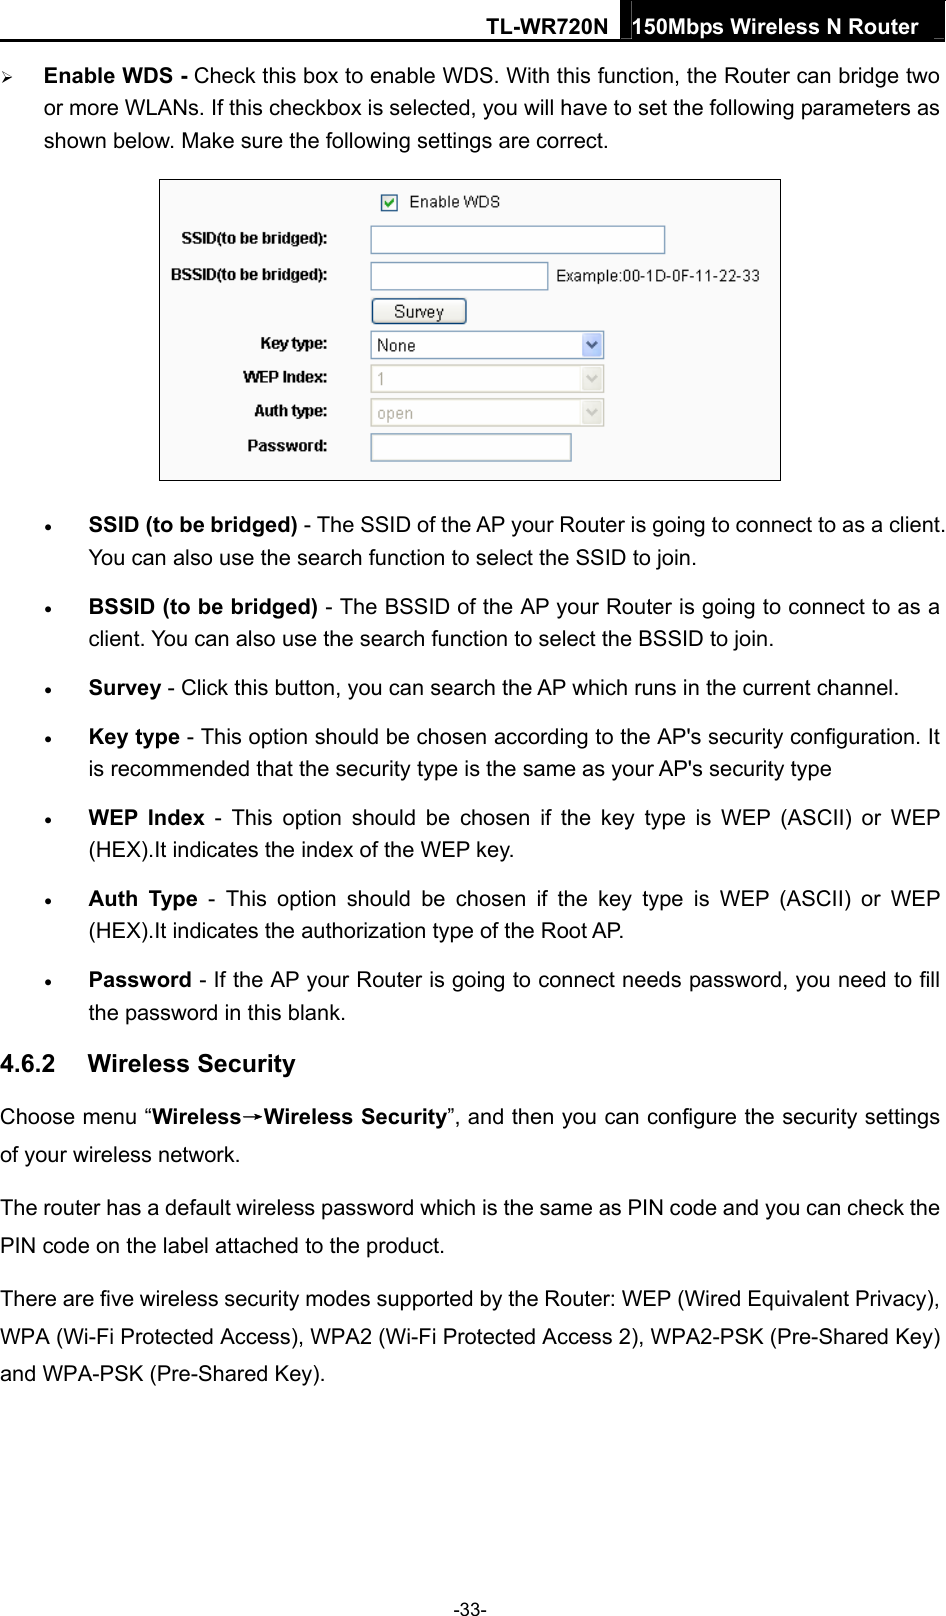 TL-WR720N 150Mbps Wireless N Router   Enable WDS - Check this box to enable WDS. With this function, the Router can bridge two or more WLANs. If this checkbox is selected, you will have to set the following parameters as shown below. Make sure the following settings are correct.   SSID (to be bridged) - The SSID of the AP your Router is going to connect to as a client. You can also use the search function to select the SSID to join.  BSSID (to be bridged) - The BSSID of the AP your Router is going to connect to as a client. You can also use the search function to select the BSSID to join.  Survey - Click this button, you can search the AP which runs in the current channel.  Key type - This option should be chosen according to the AP&apos;s security configuration. It is recommended that the security type is the same as your AP&apos;s security type  WEP Index - This option should be chosen if the key type is WEP (ASCII) or WEP (HEX).It indicates the index of the WEP key.  Auth Type - This option should be chosen if the key type is WEP (ASCII) or WEP (HEX).It indicates the authorization type of the Root AP.  Password - If the AP your Router is going to connect needs password, you need to fill the password in this blank. 4.6.2  Wireless Security   Choose menu “Wireless→Wireless Security”, and then you can configure the security settings of your wireless network. The router has a default wireless password which is the same as PIN code and you can check the PIN code on the label attached to the product. There are five wireless security modes supported by the Router: WEP (Wired Equivalent Privacy), WPA (Wi-Fi Protected Access), WPA2 (Wi-Fi Protected Access 2), WPA2-PSK (Pre-Shared Key) and WPA-PSK (Pre-Shared Key). -33- 